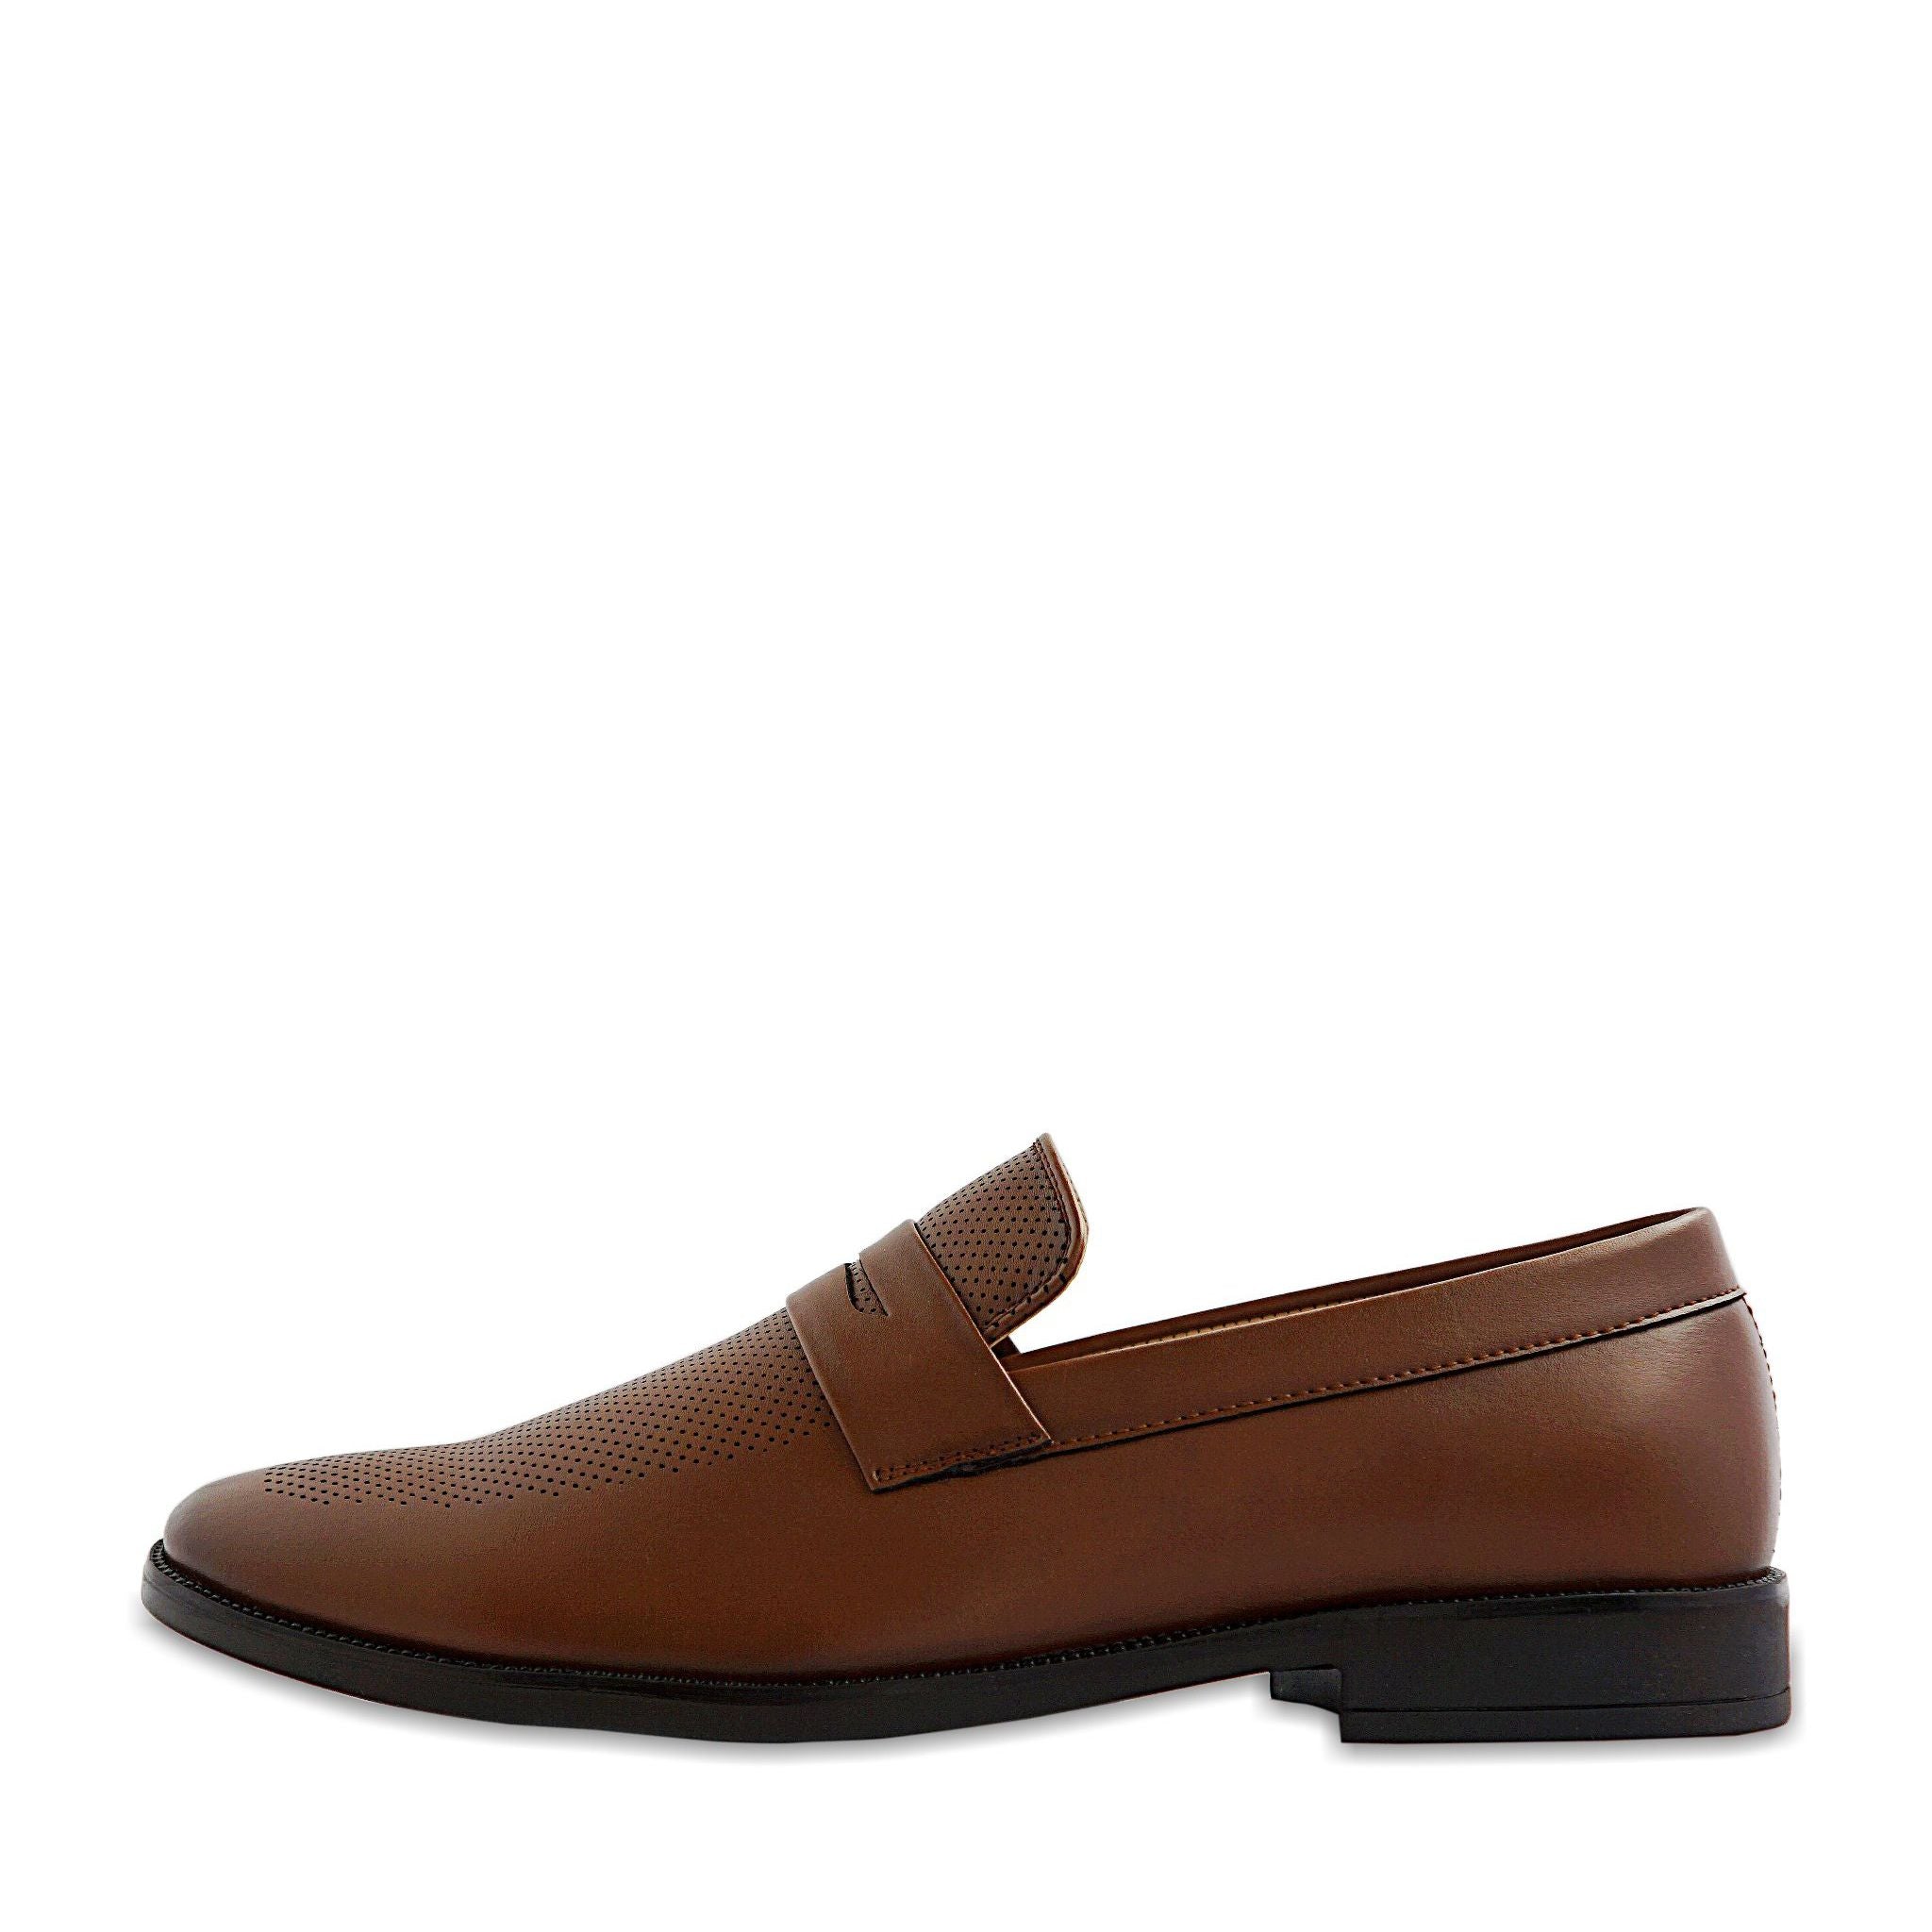 Mens Formal Shoes online in Dubai and UAE